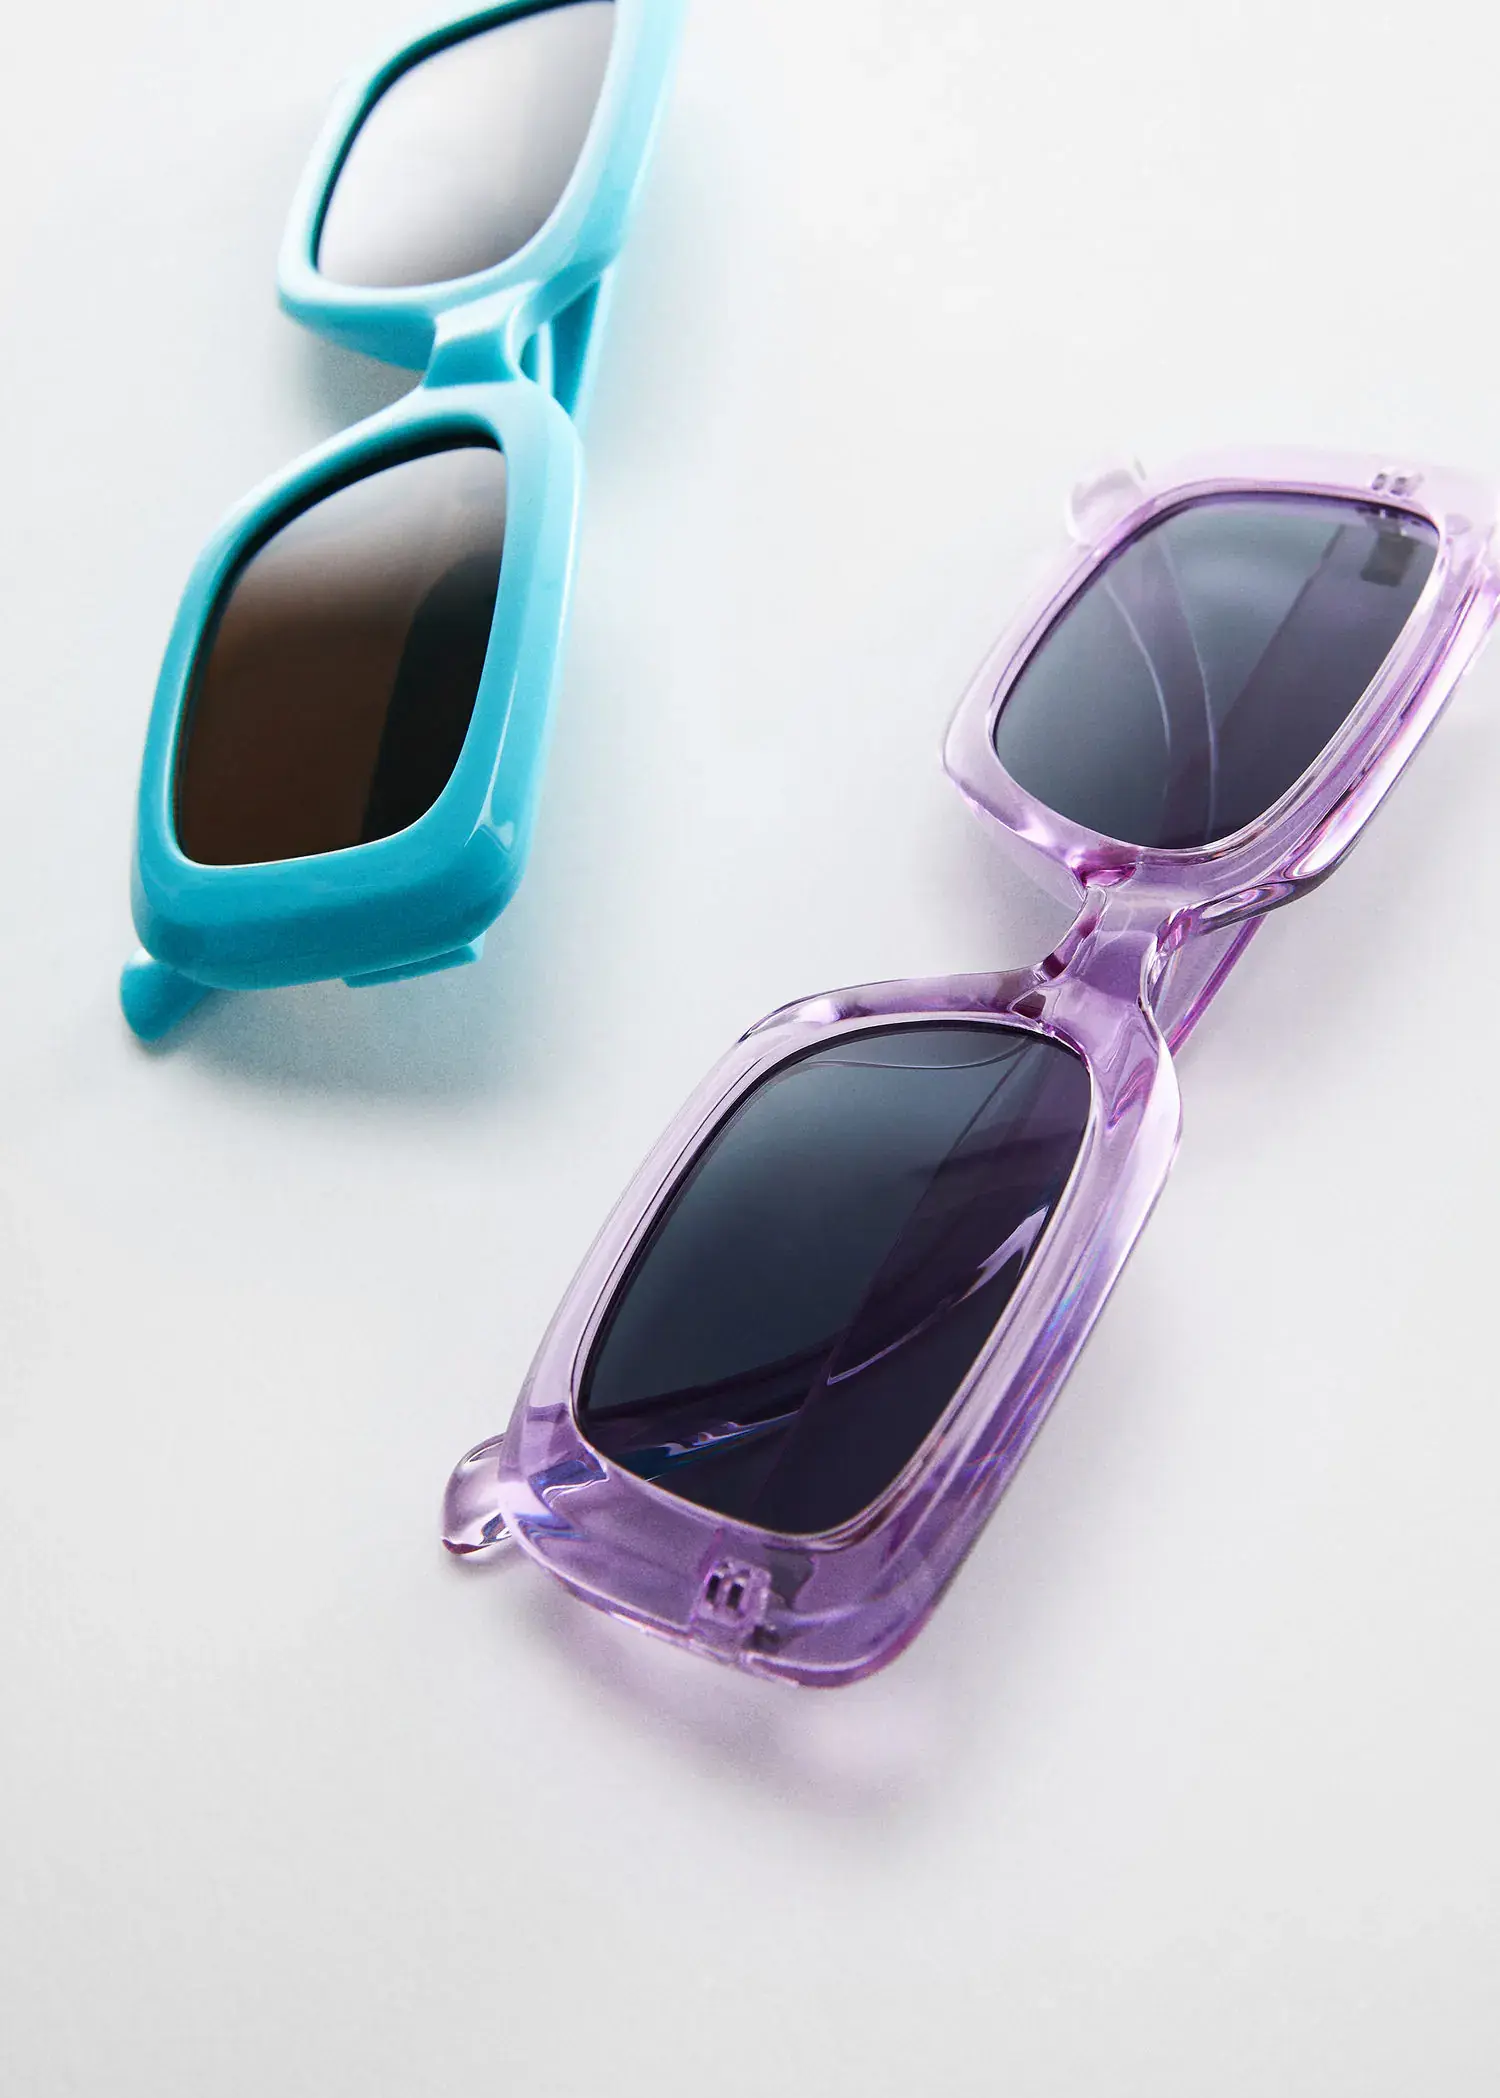 Mango Rectangular sunglasses. two pairs of sunglasses sitting next to each other on a table. 